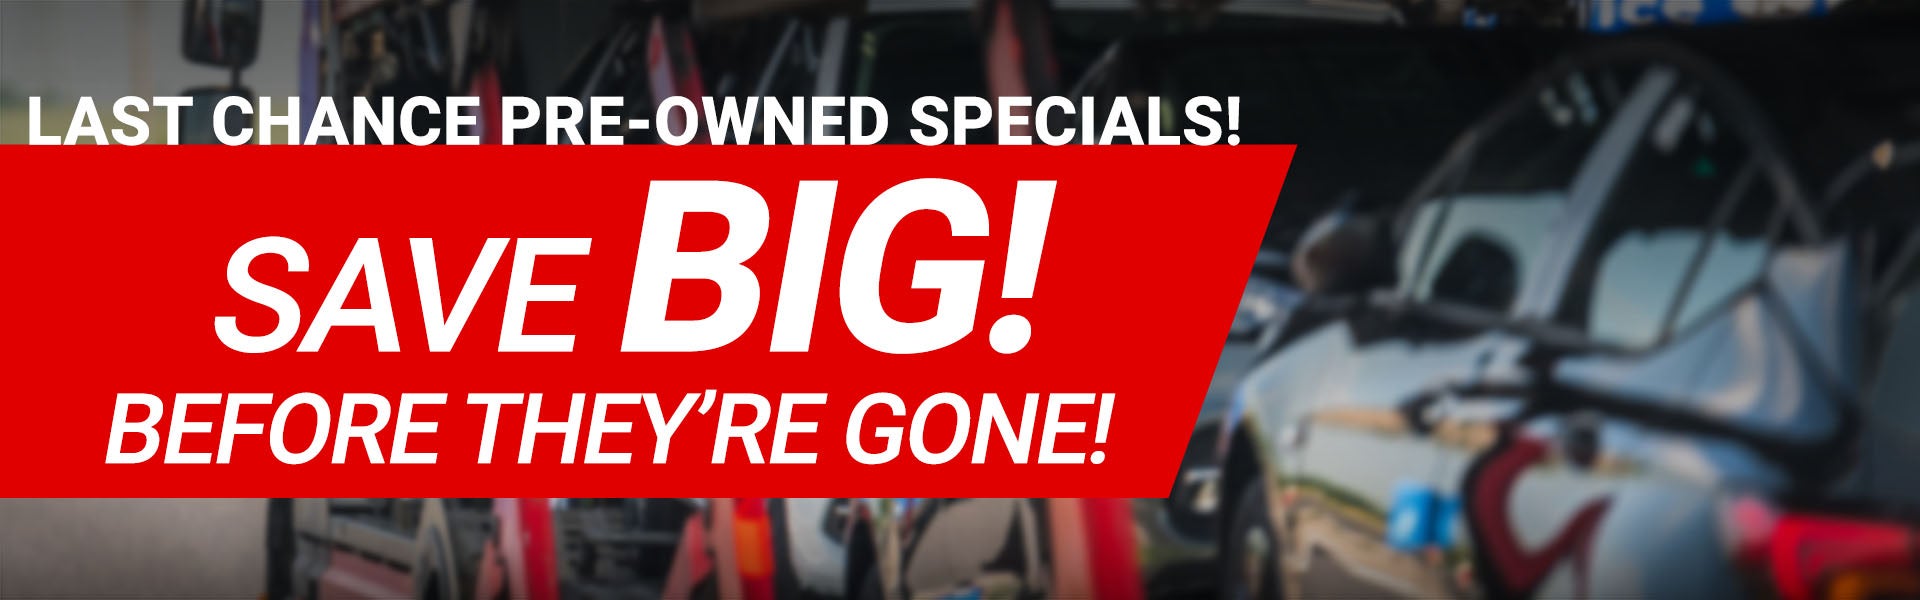 Last Chance pre-owned specials!